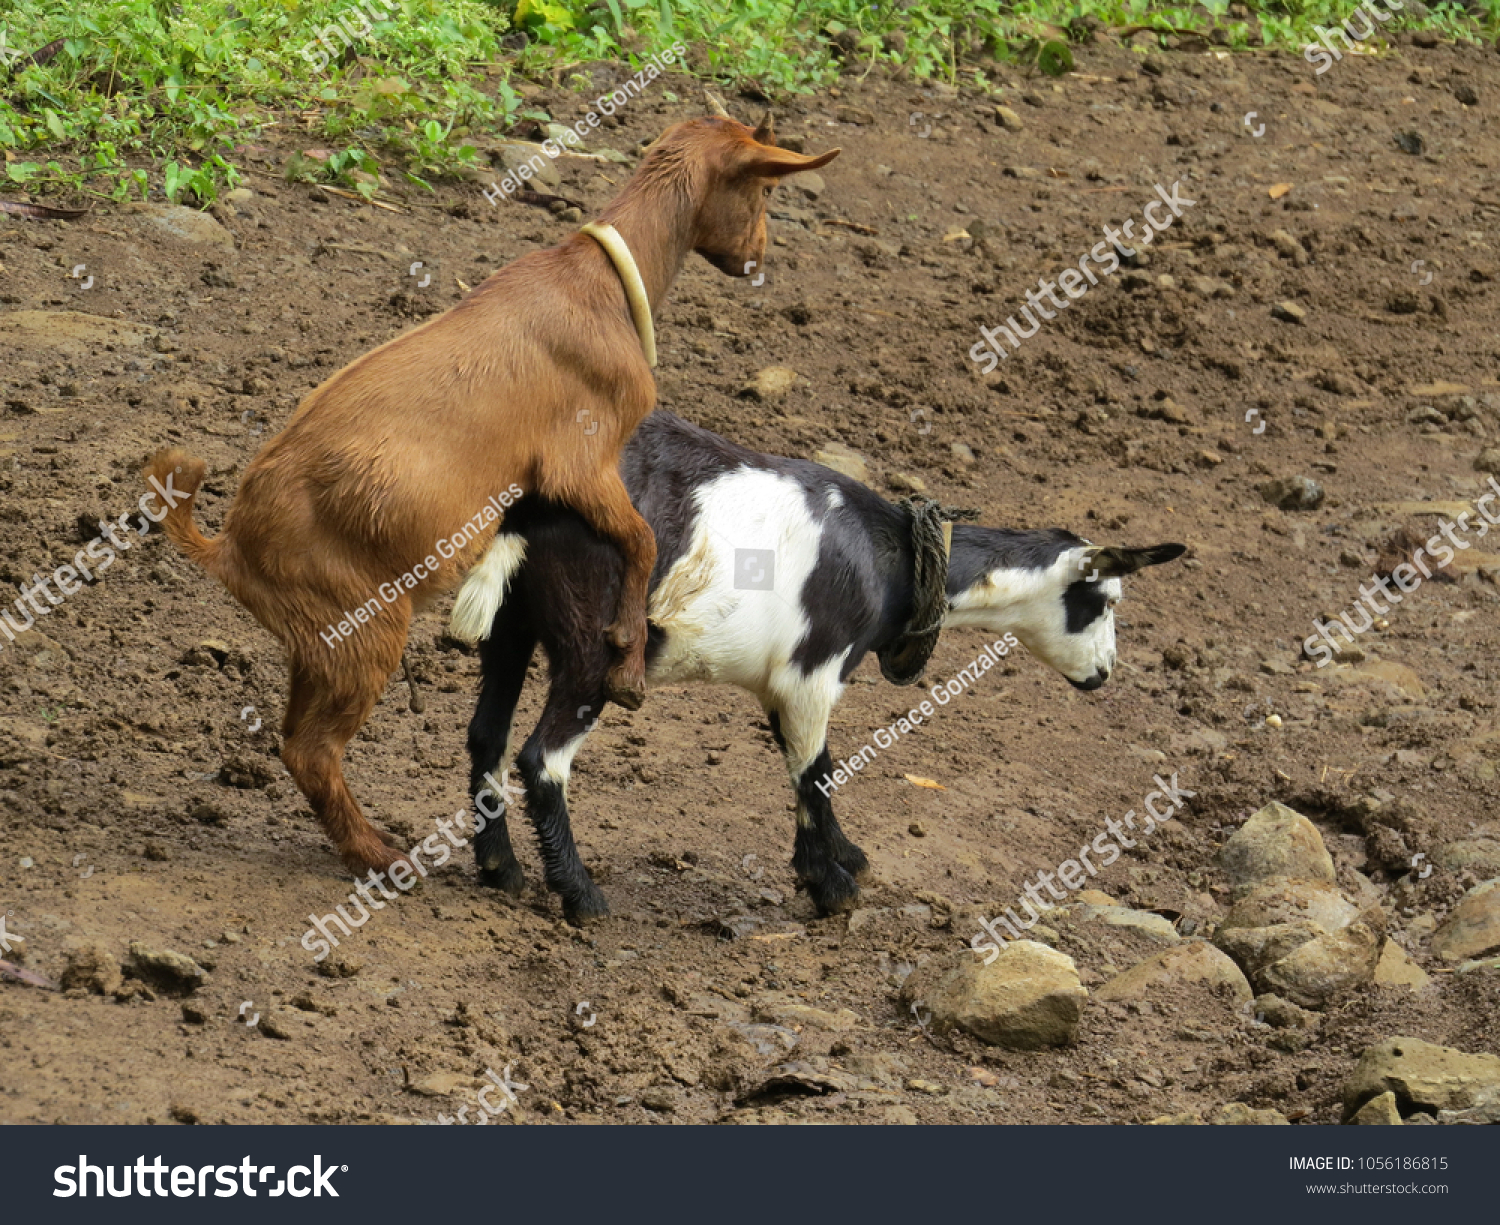 stock-photo-goats-mating-in-the-field-re